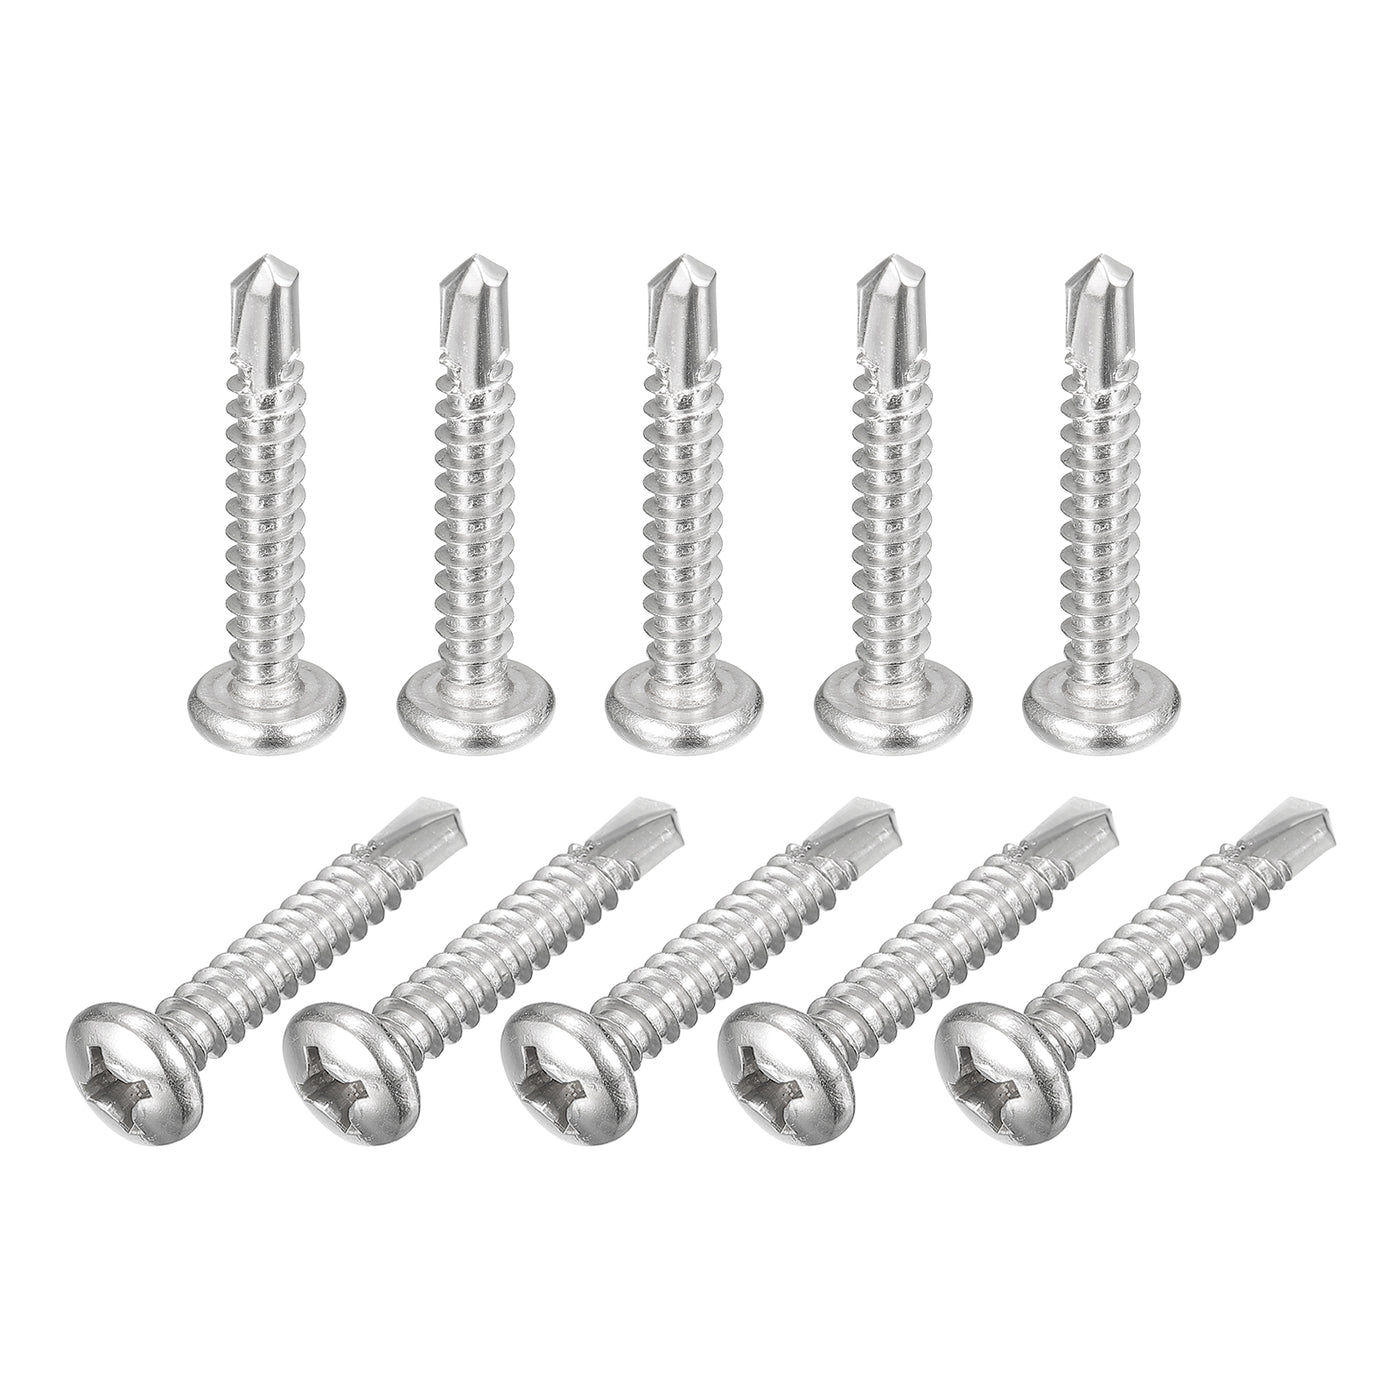 uxcell Uxcell #12 x 1-1/4" Self Drilling Screws, 10pcs Phillips Pan Head Self Tapping Screws